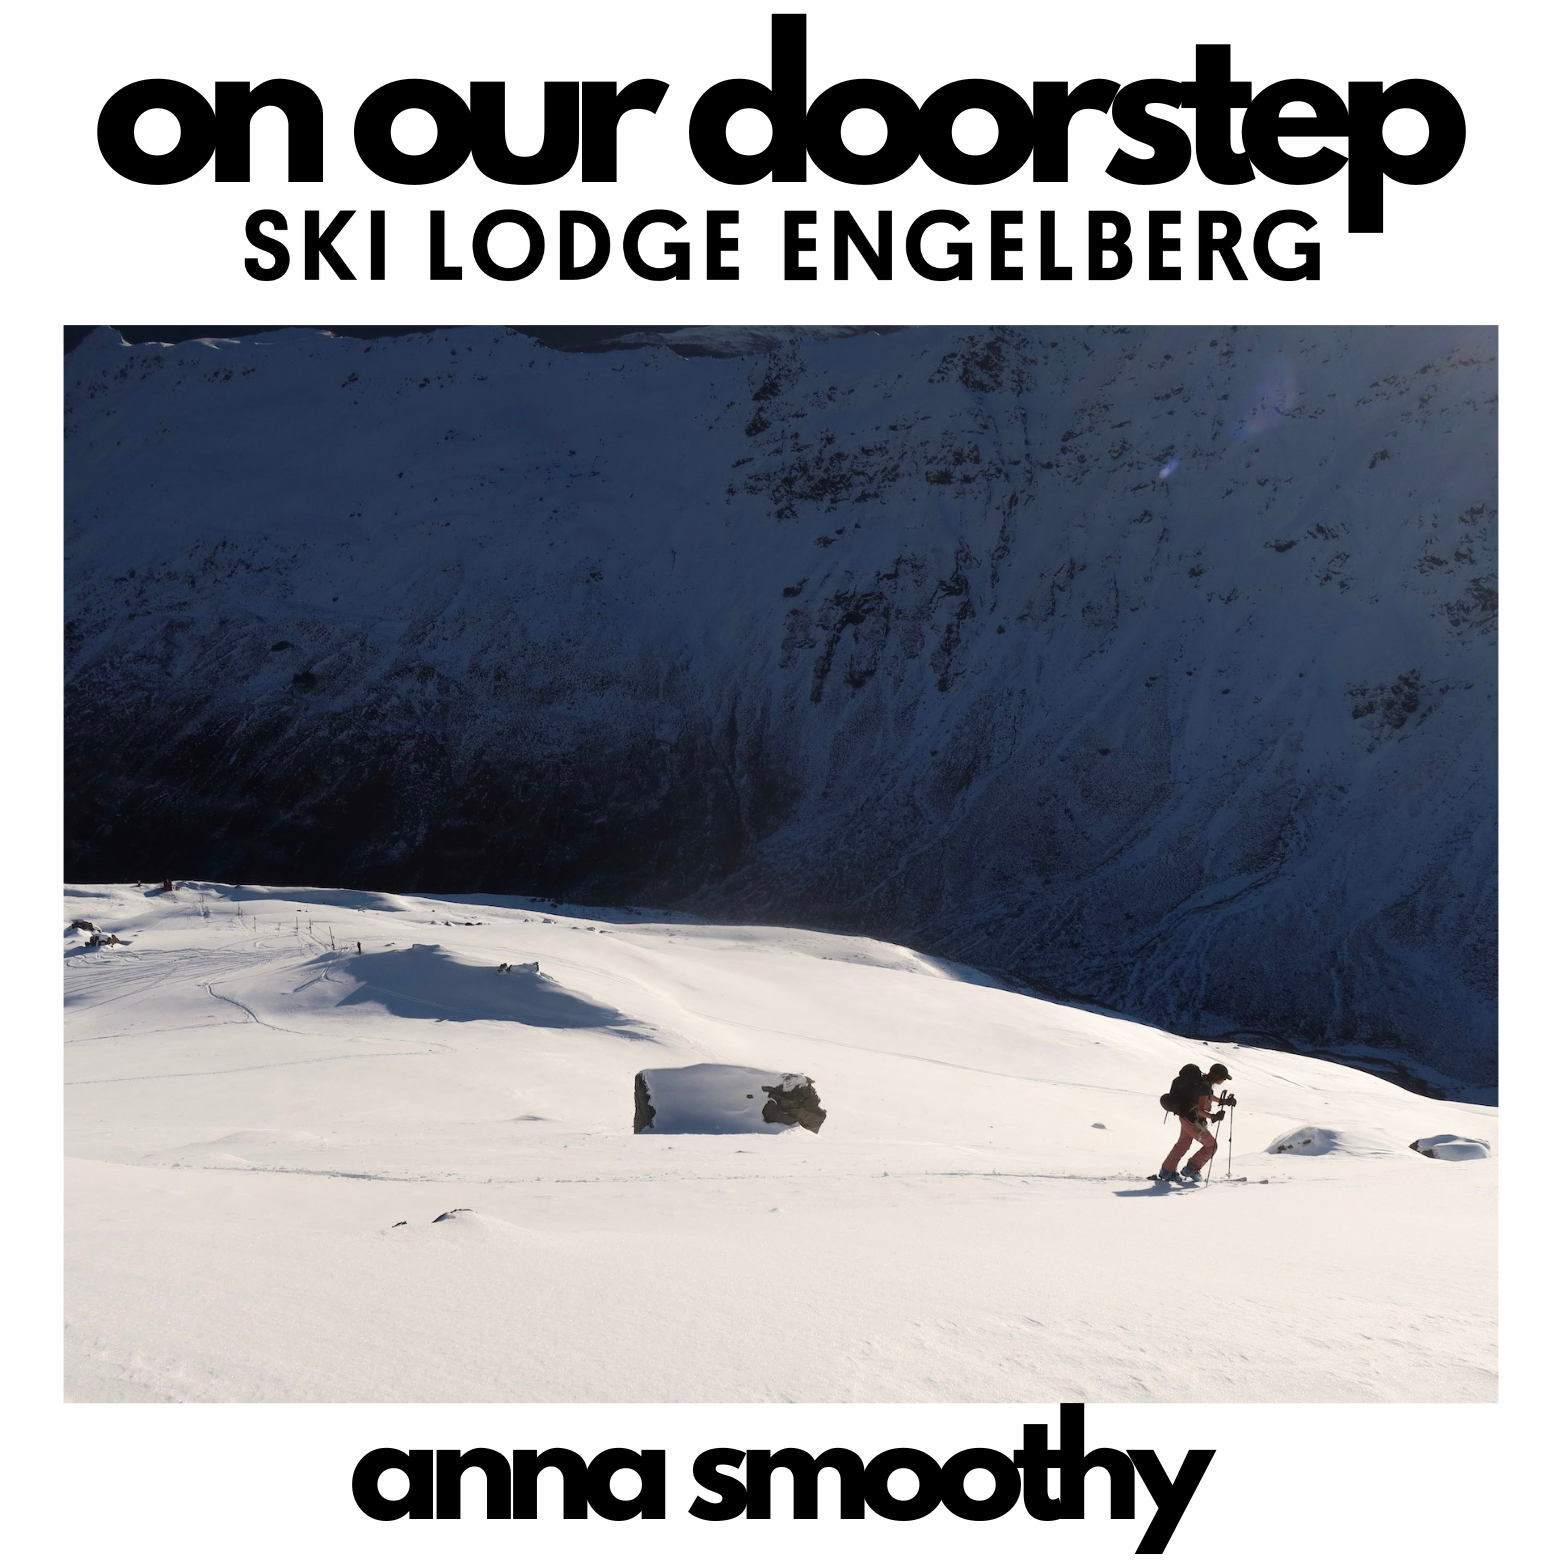 Ski Lodge On Our Doorstep Logo with image of skier Anna Smoothy